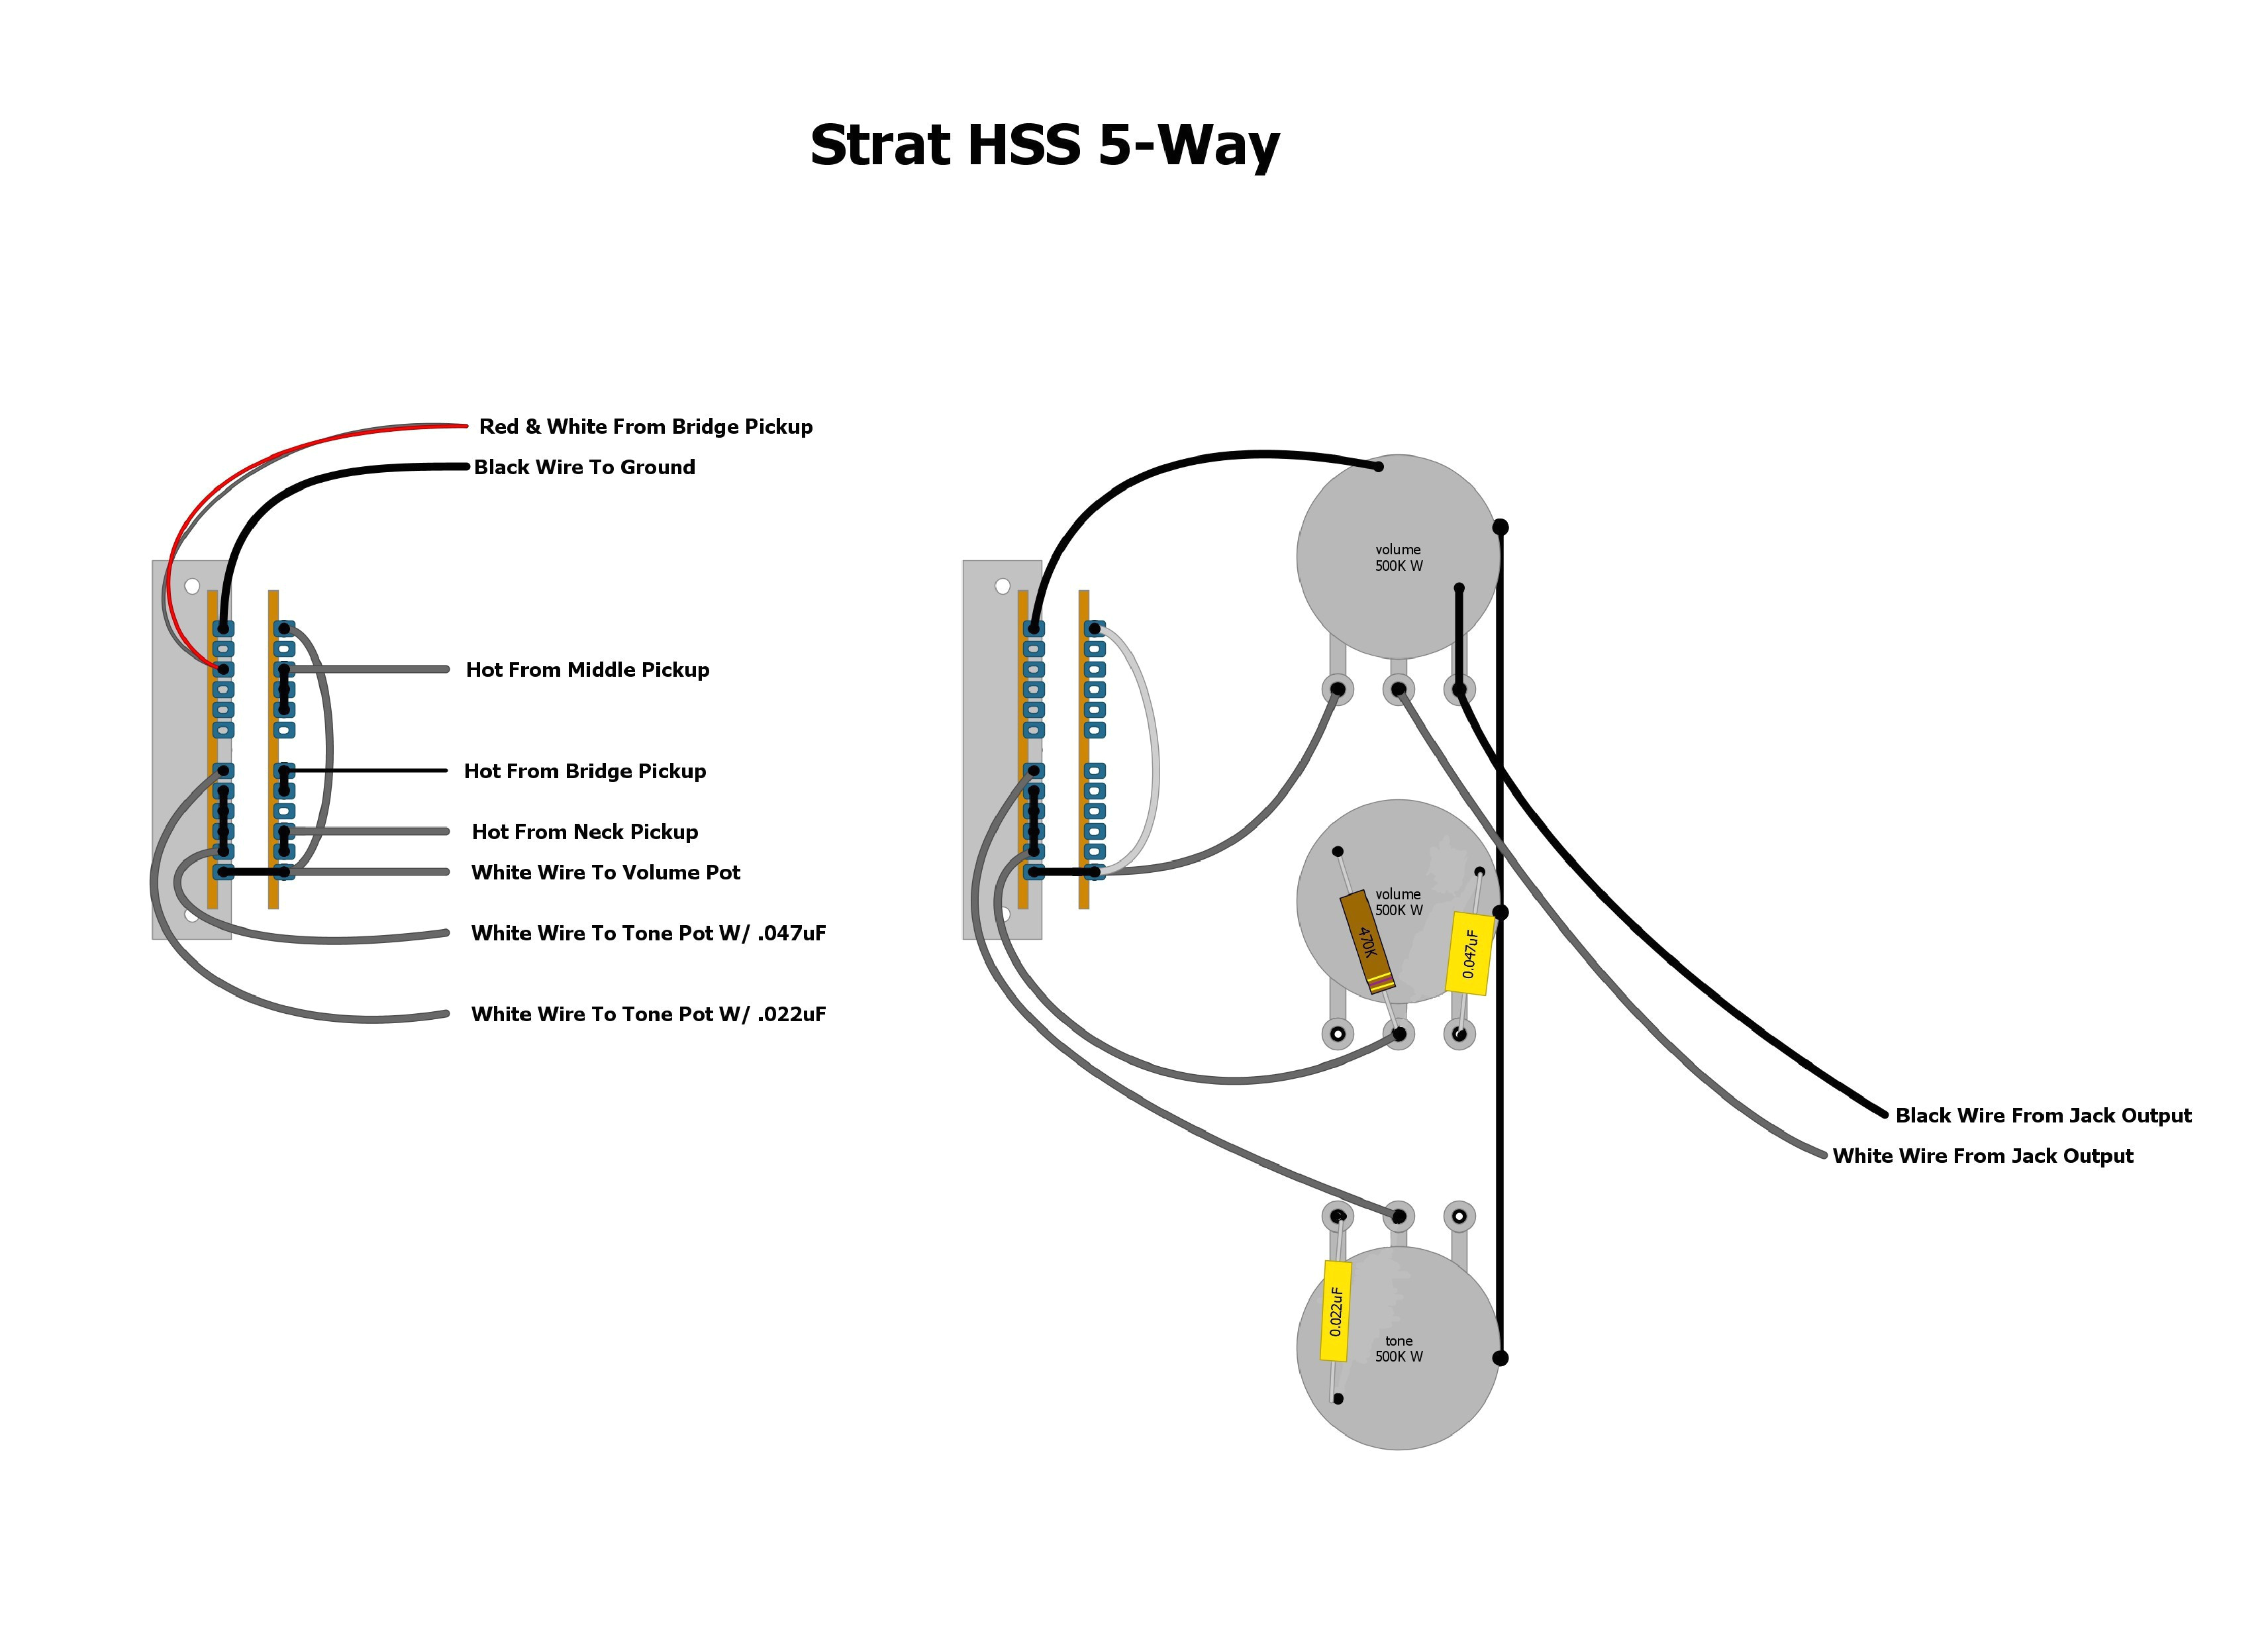 fender support wiring diagrams wiring diagram review fender support wiring diagrams